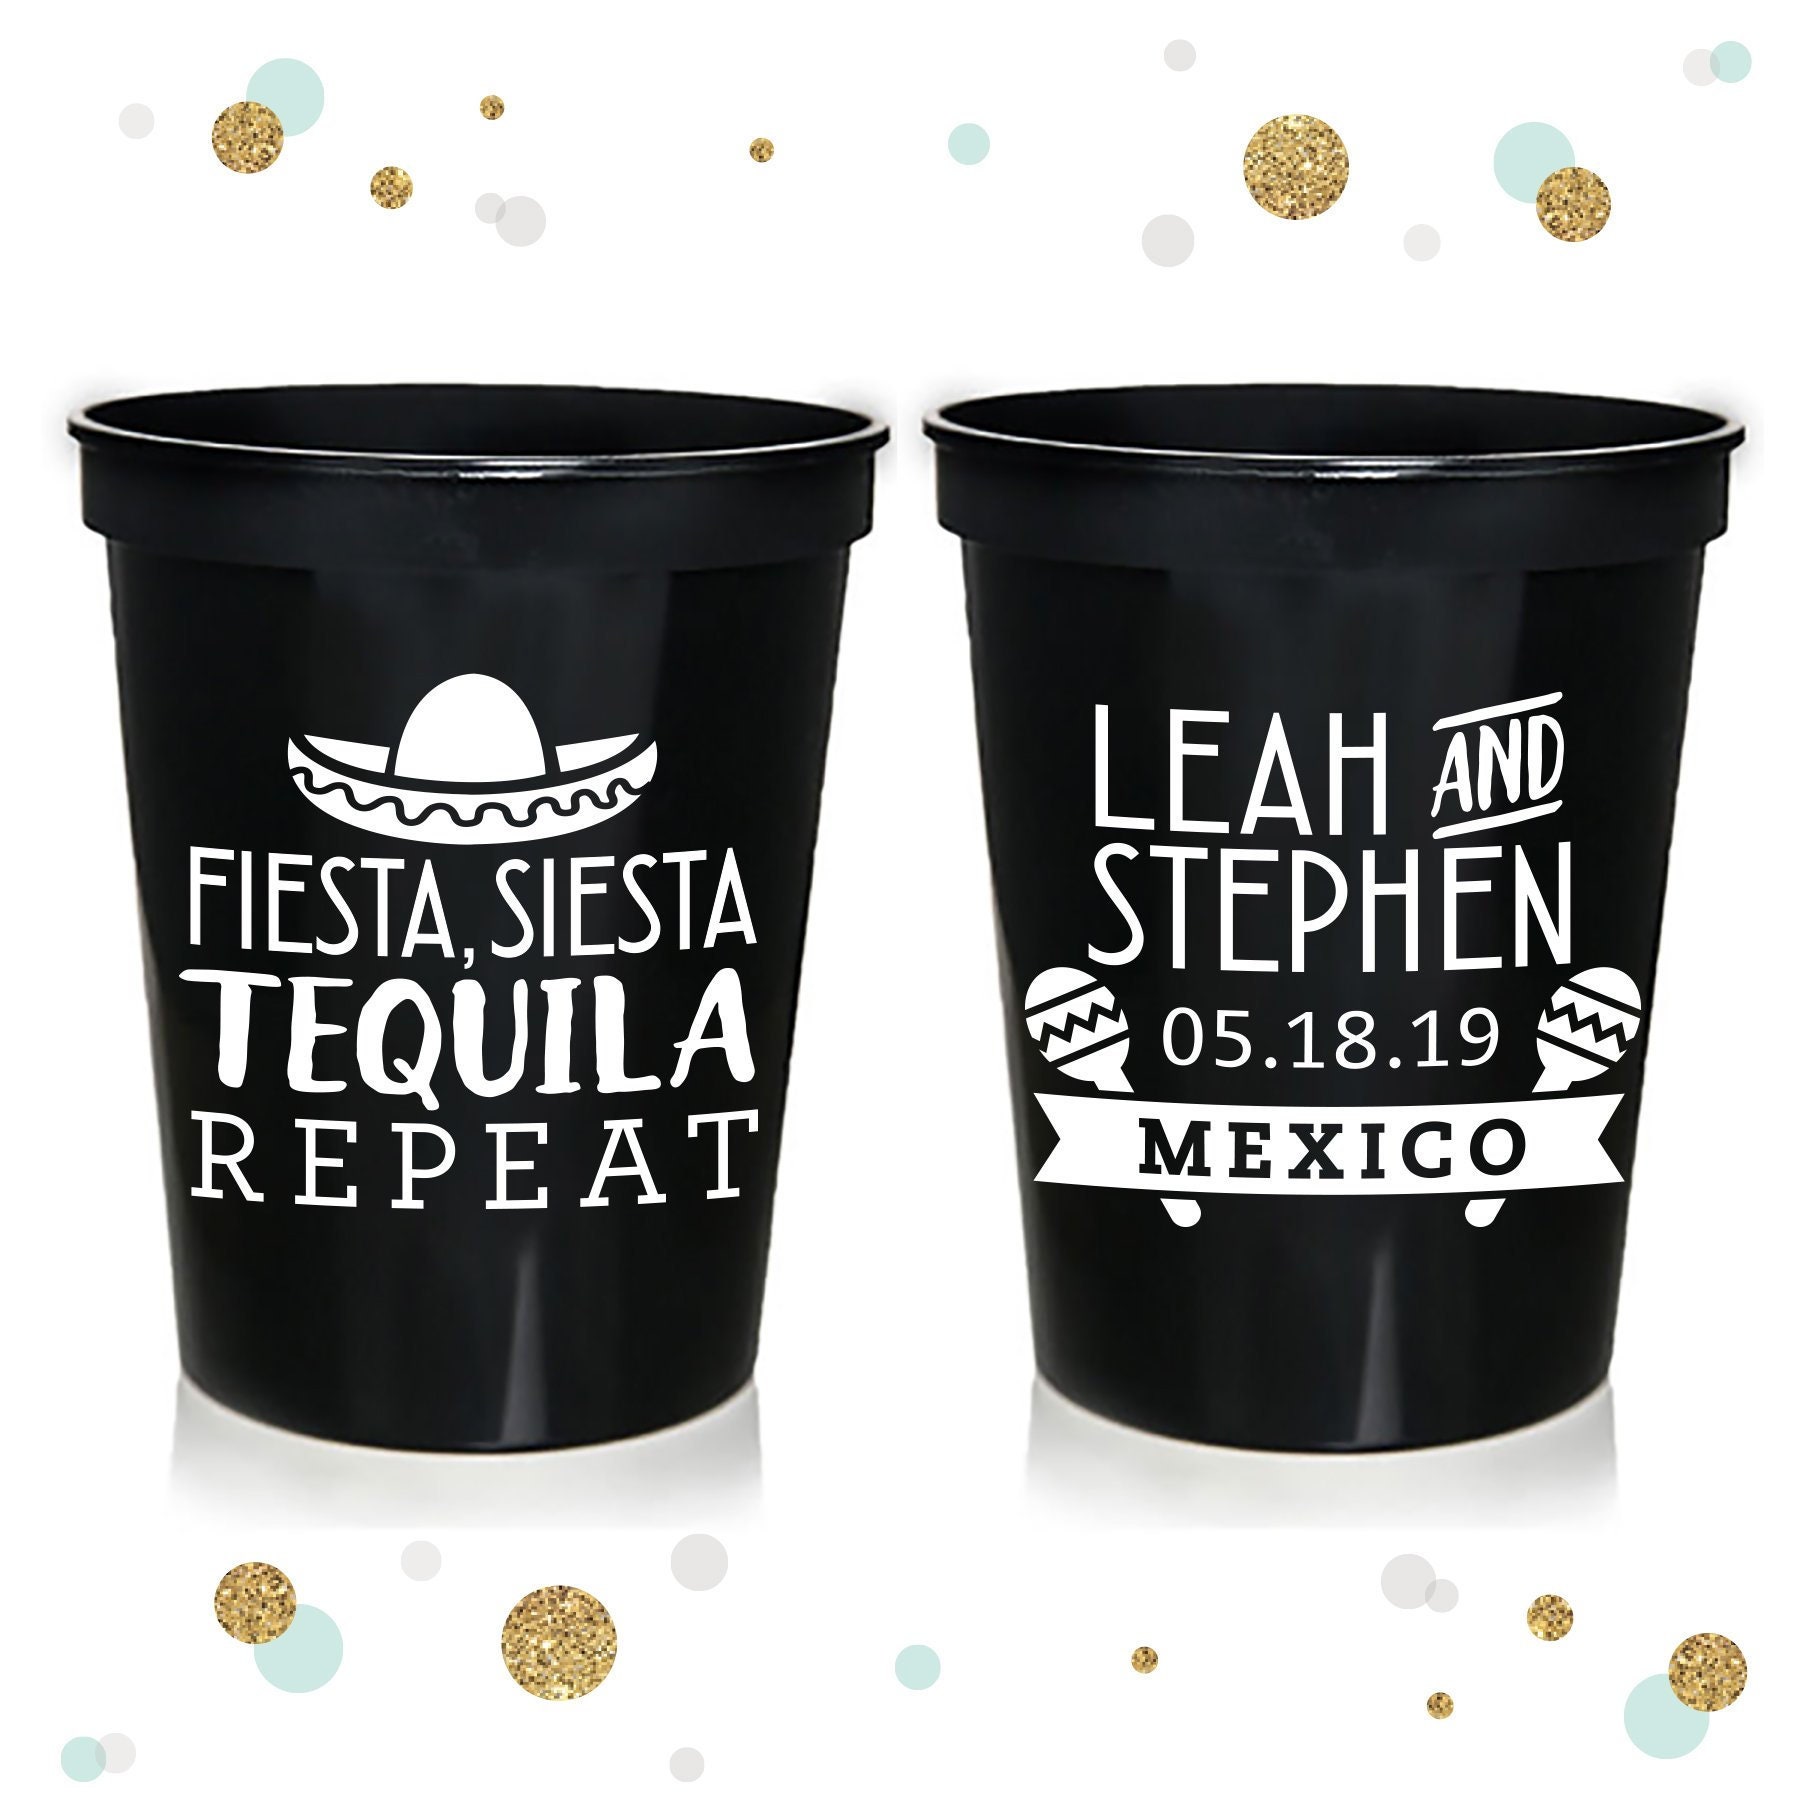 Mexican Wedding Fiesta Siesta Tequila Repeat Yellow Mood Cups Mexico Party Mexico Wedding Favor Mood Cups 469